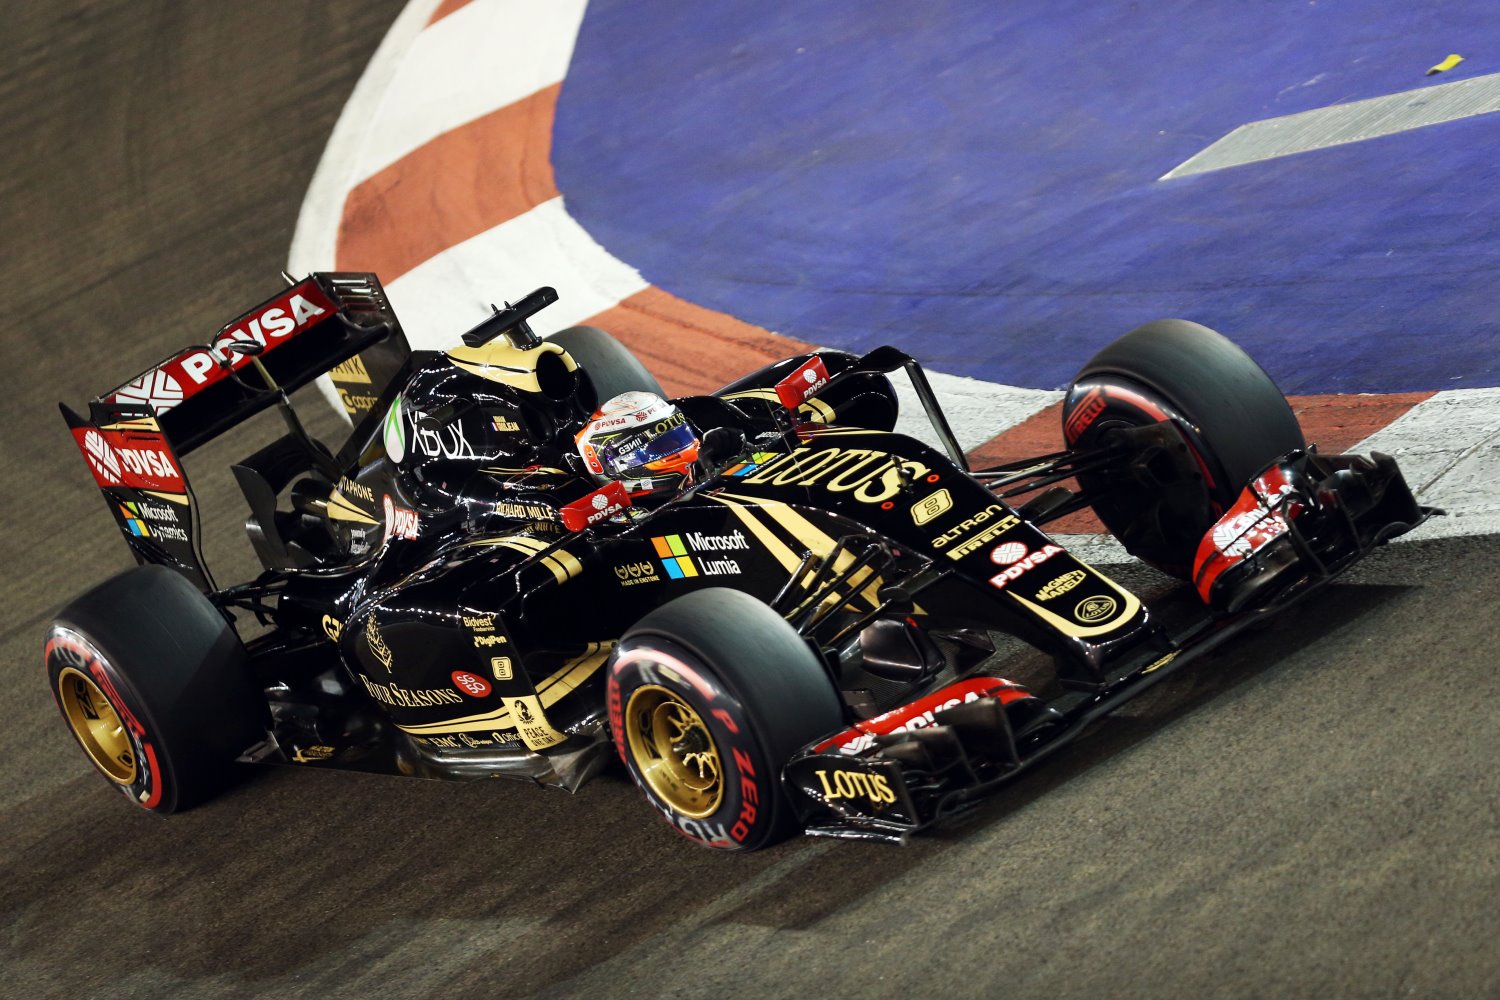 Will Renault complete deal to buy Lotus?